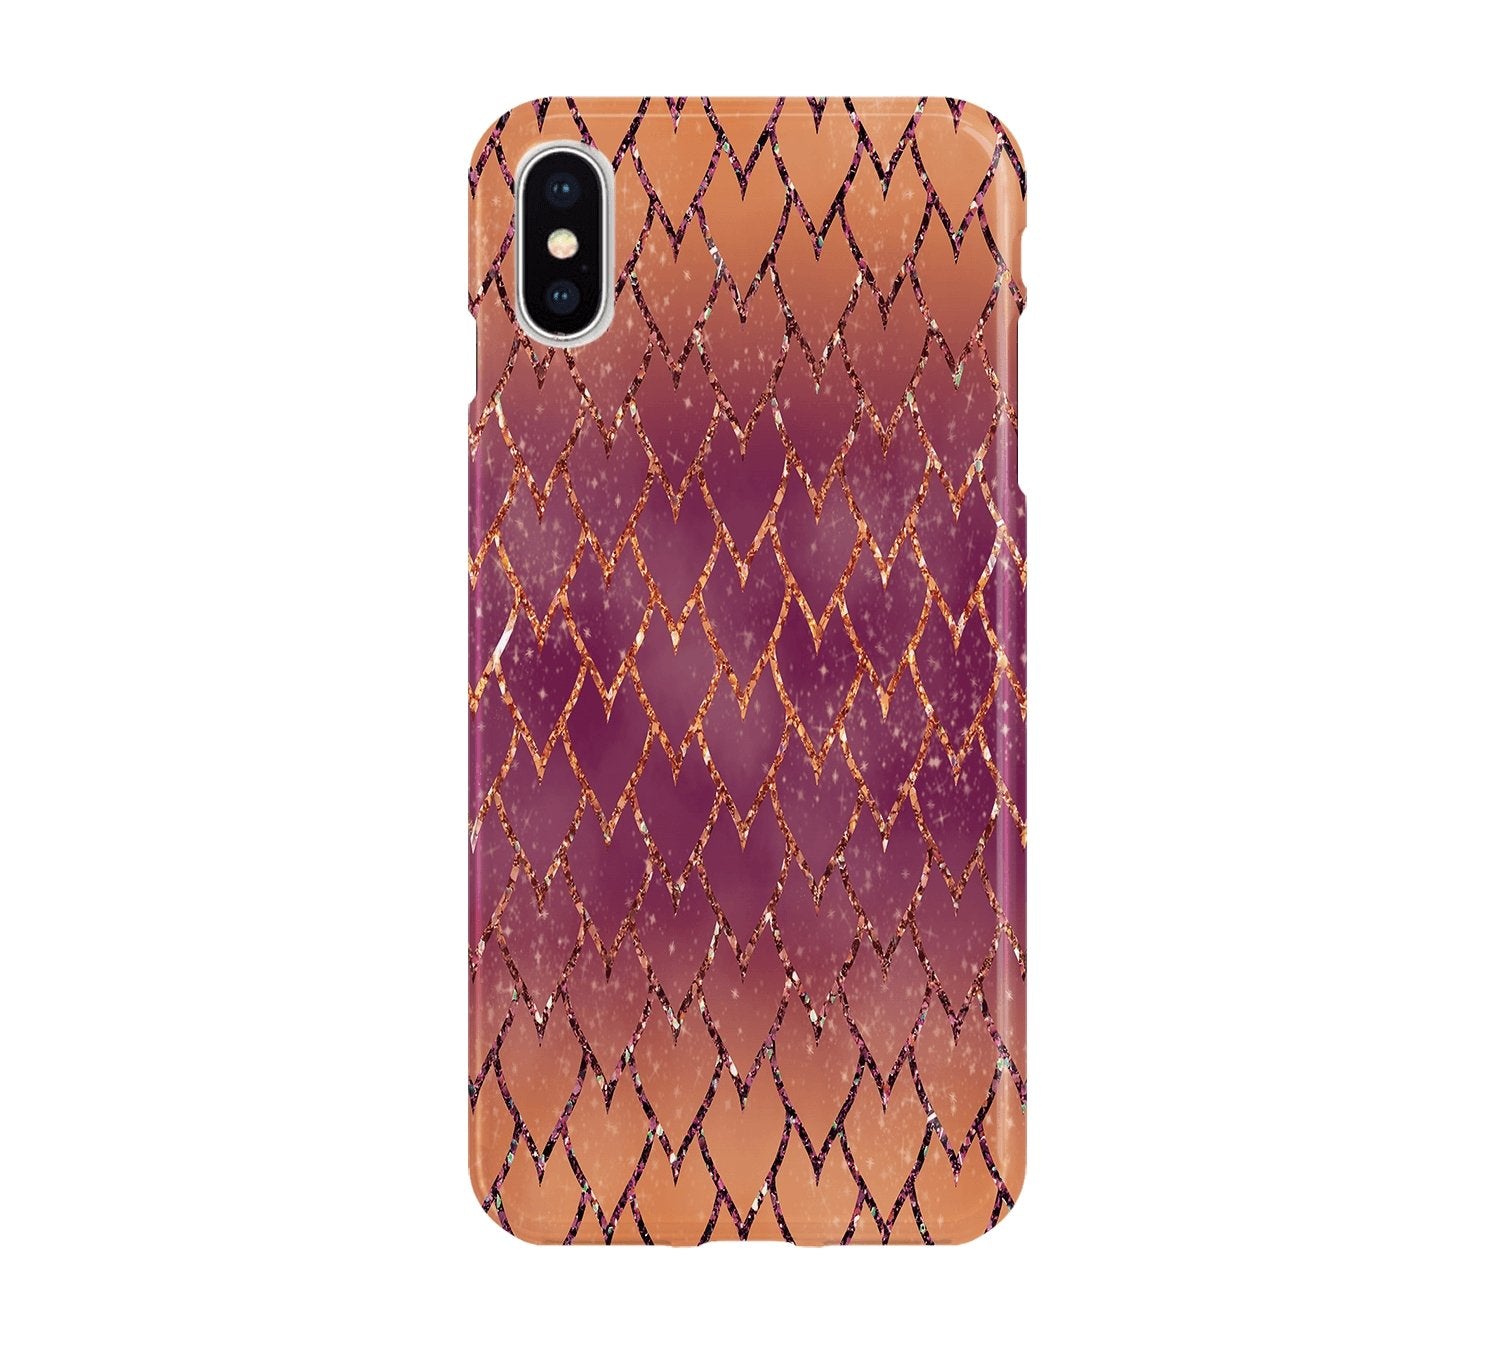 Pumpkin Spice Dragonscale - iPhone phone case designs by CaseSwagger